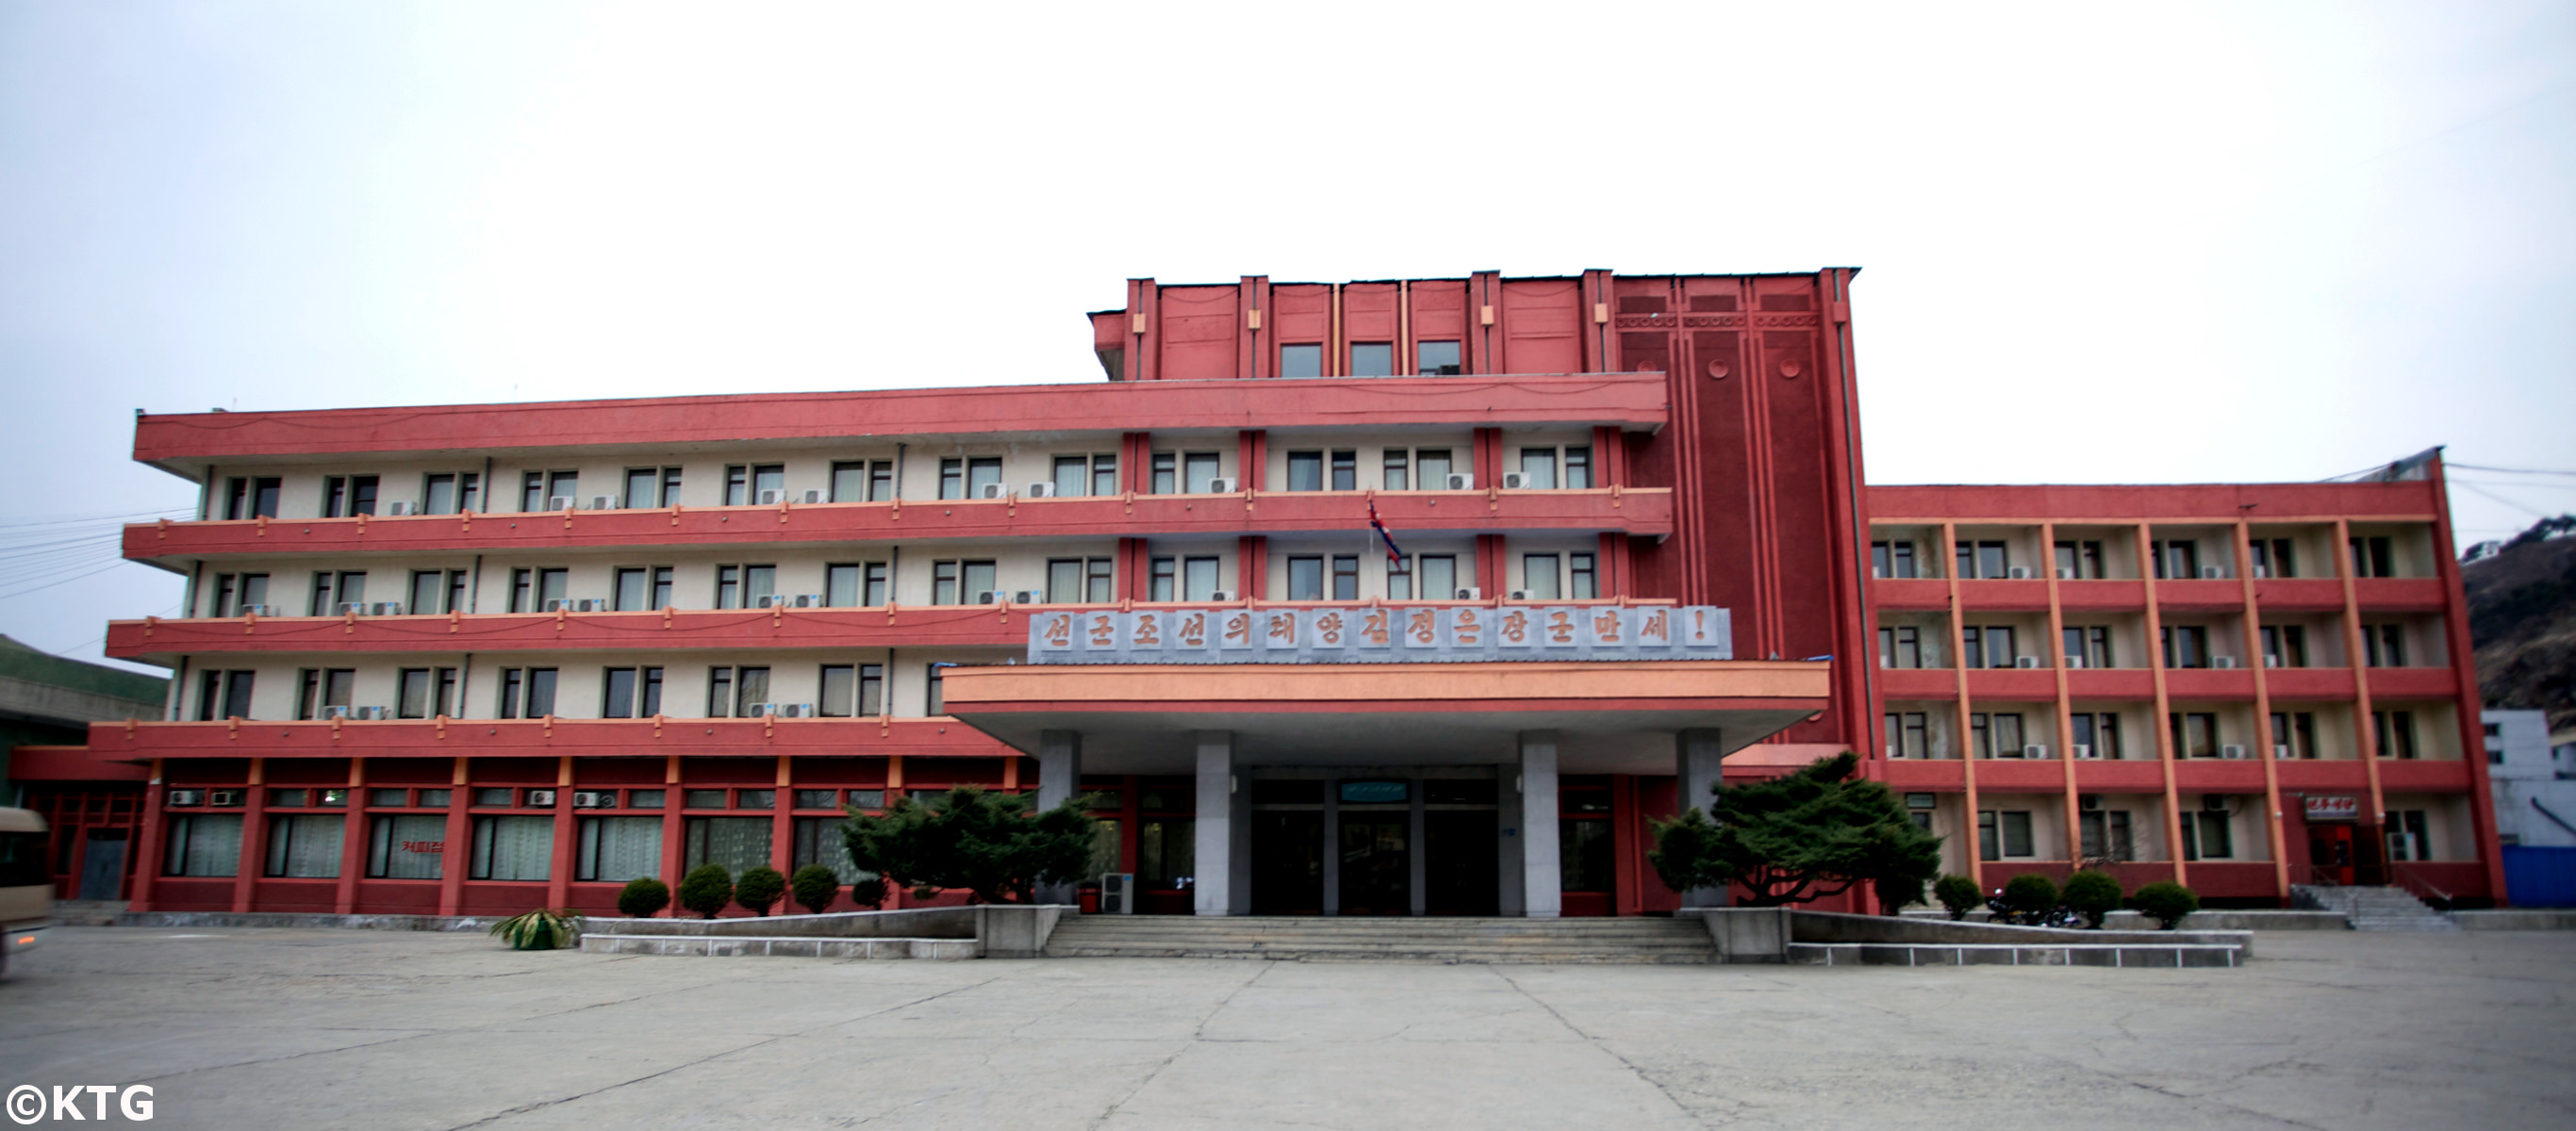 The Chongchon Hotel is a second class, low budget hotel in Hyangsan Town, North Korea (DPRK). Trip arranged by KTG Tours